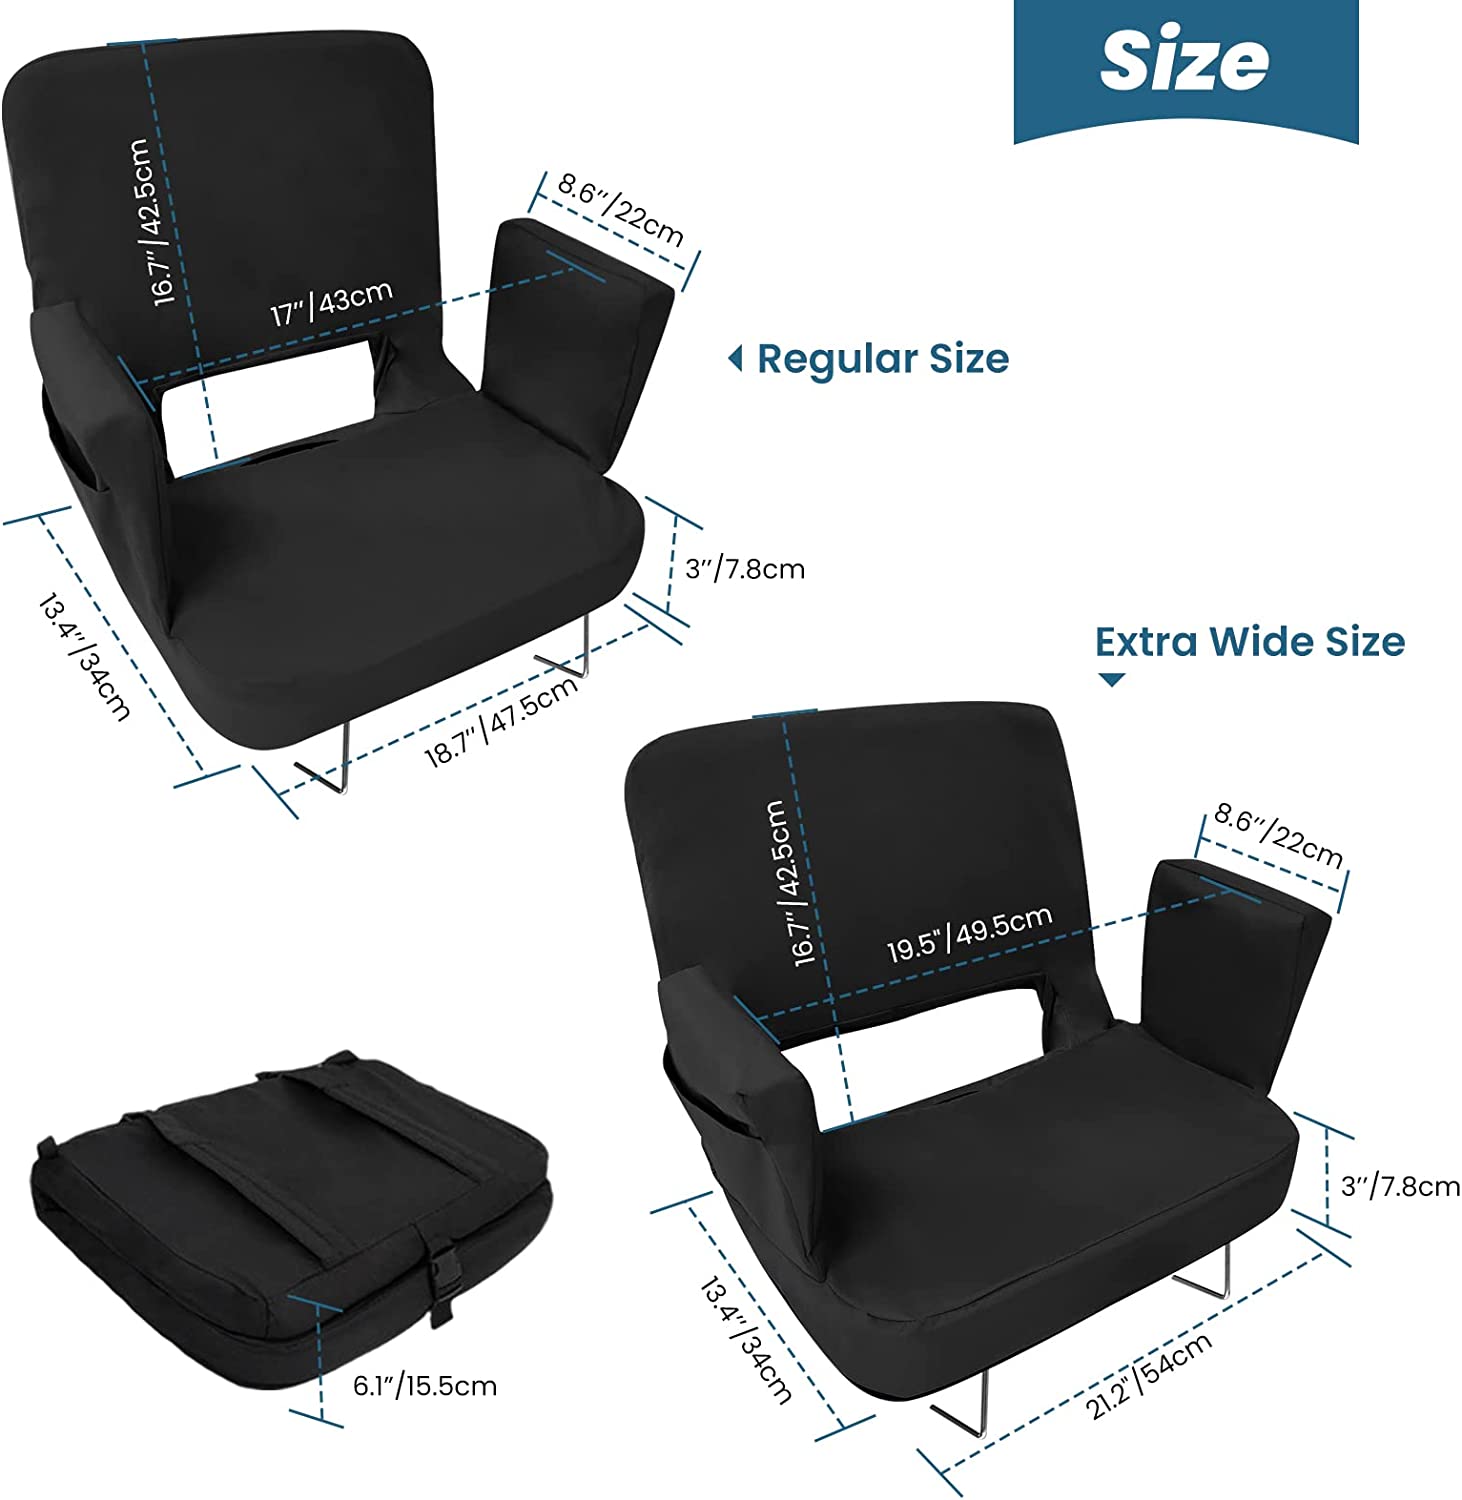 TOPSKY Stadium Seat with Back Support 3 Reclining Positions, Wide Bleacher Seats with 2 Hook Picnic Seat XY-CR-693-43